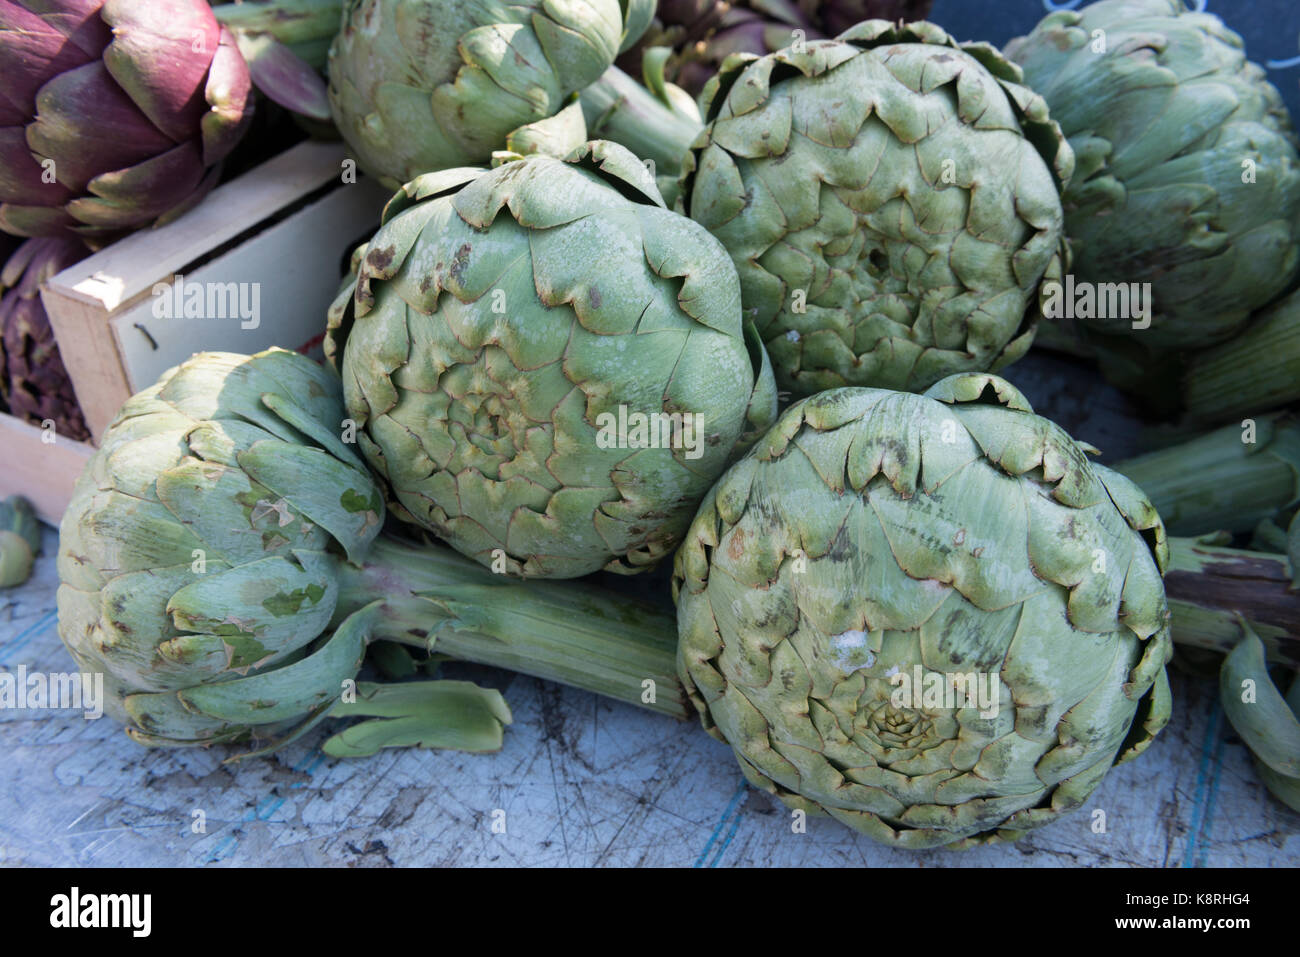 Artichokes on a market stall, Ferney Voltaire, Ain Rhone-Alpes, France Stock Photo